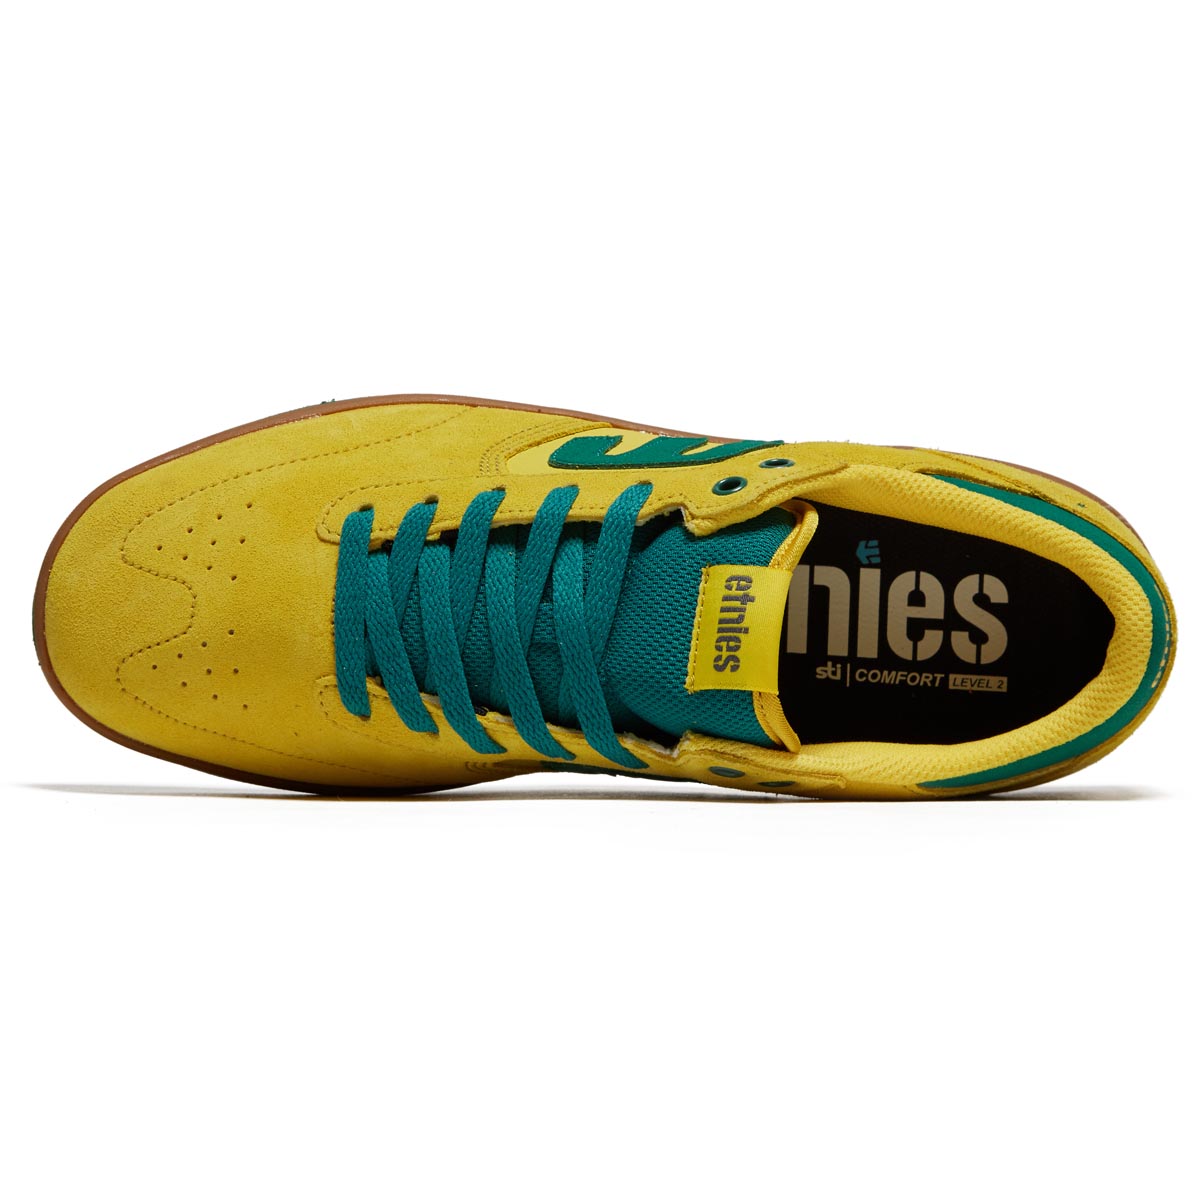 Etnies Windrow Shoes - Yellow image 3